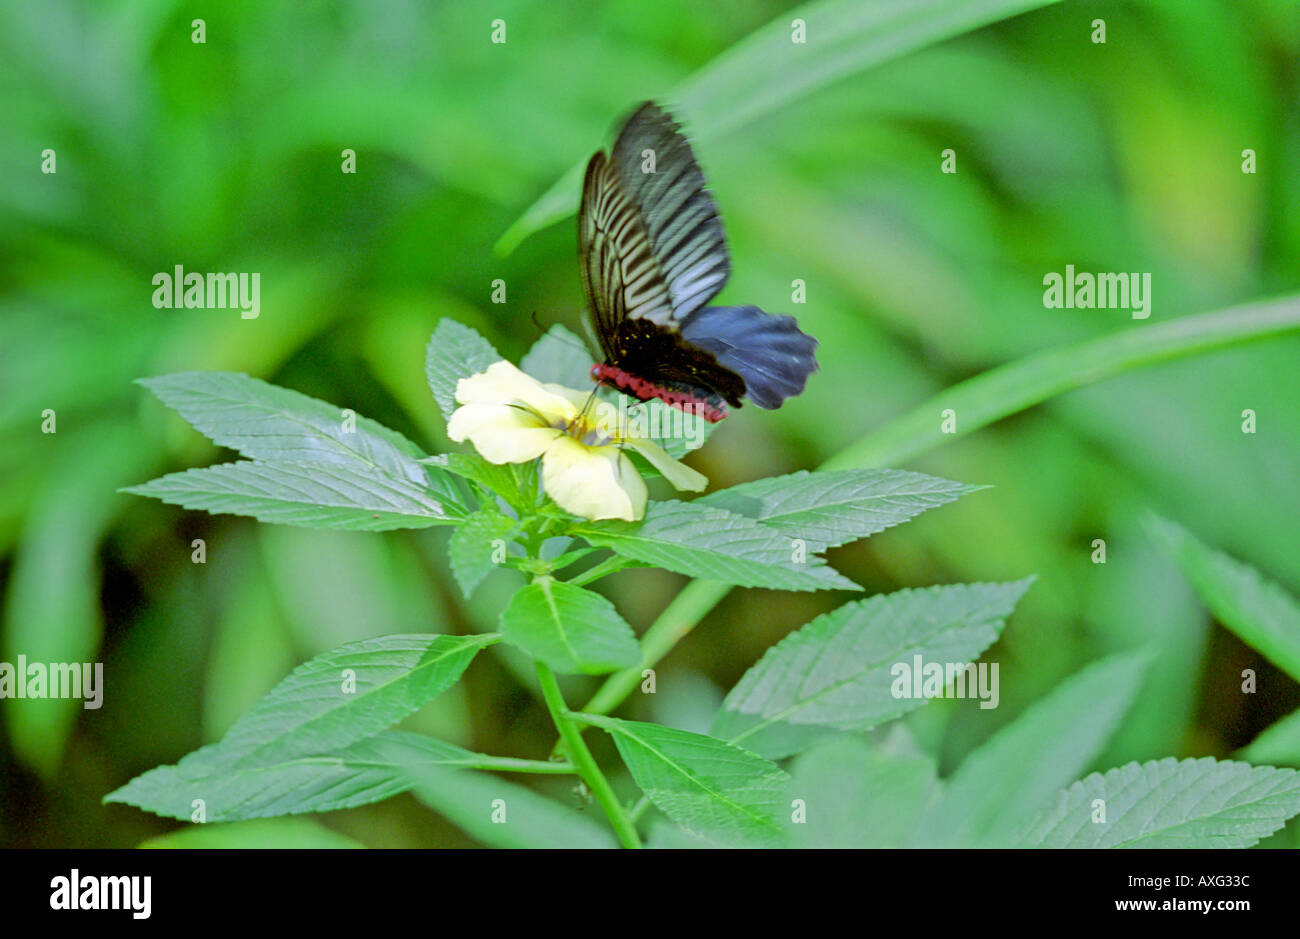 blue and red butterfly fluttering on a yellow flower in tropical foliage Stock Photo